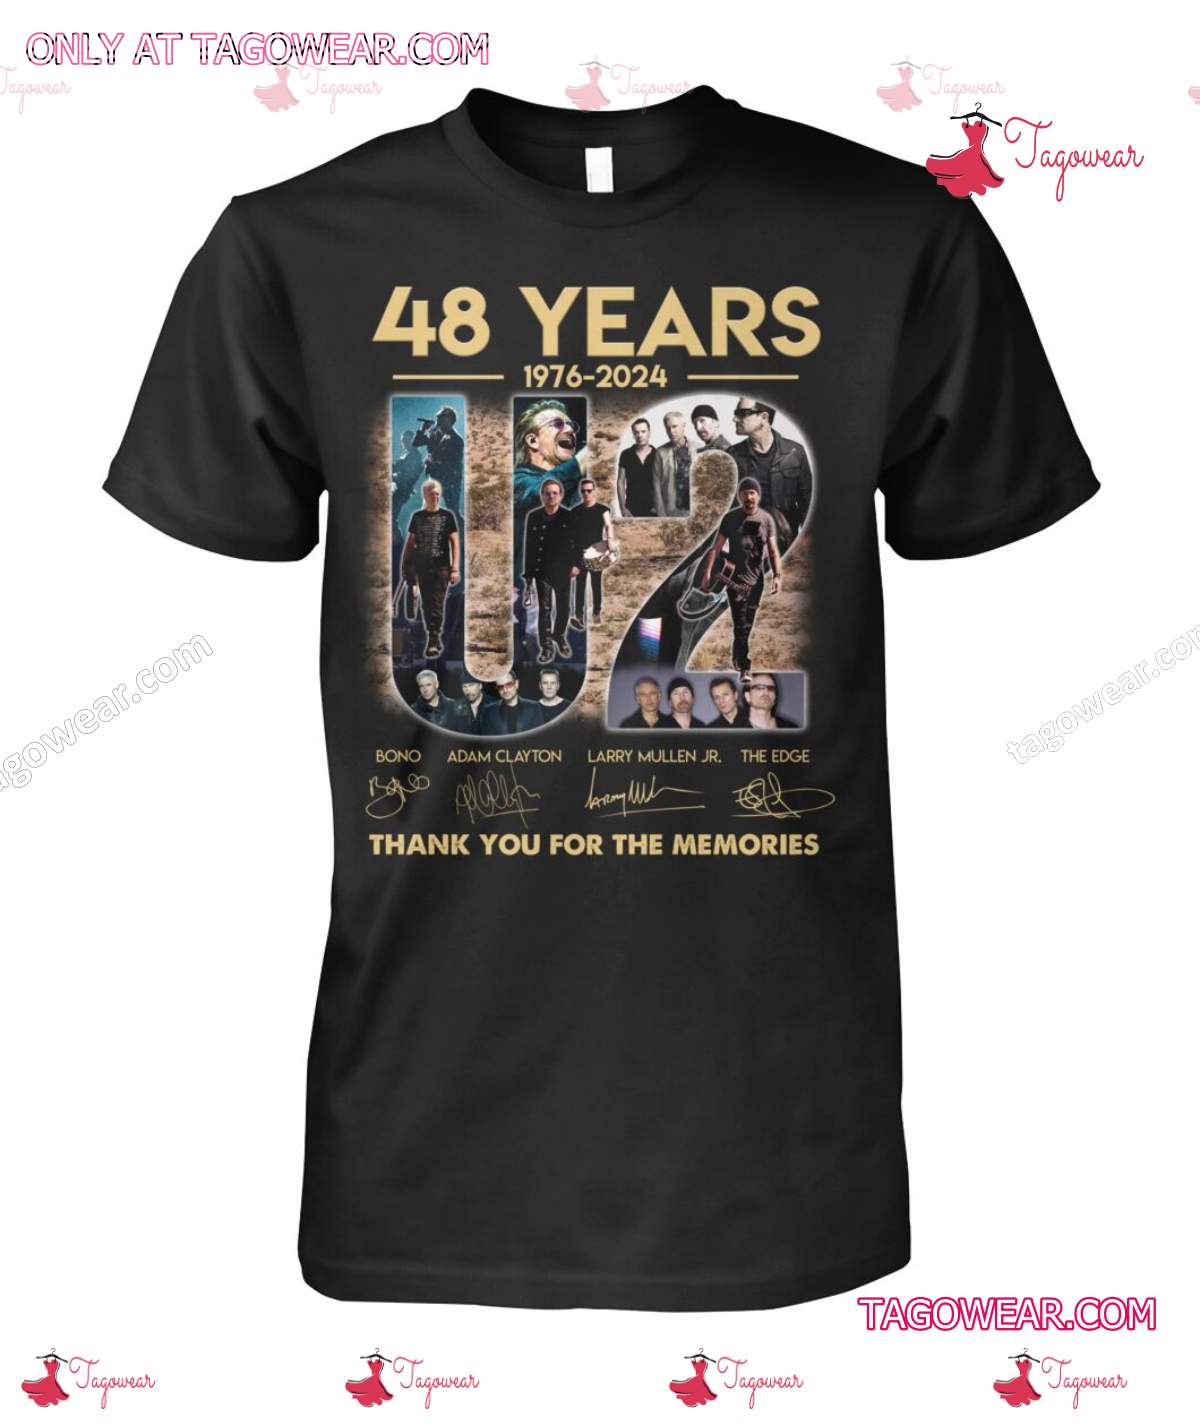 48 Years 1976-2024 U2 Signatures Thank You For The Memories Shirt a